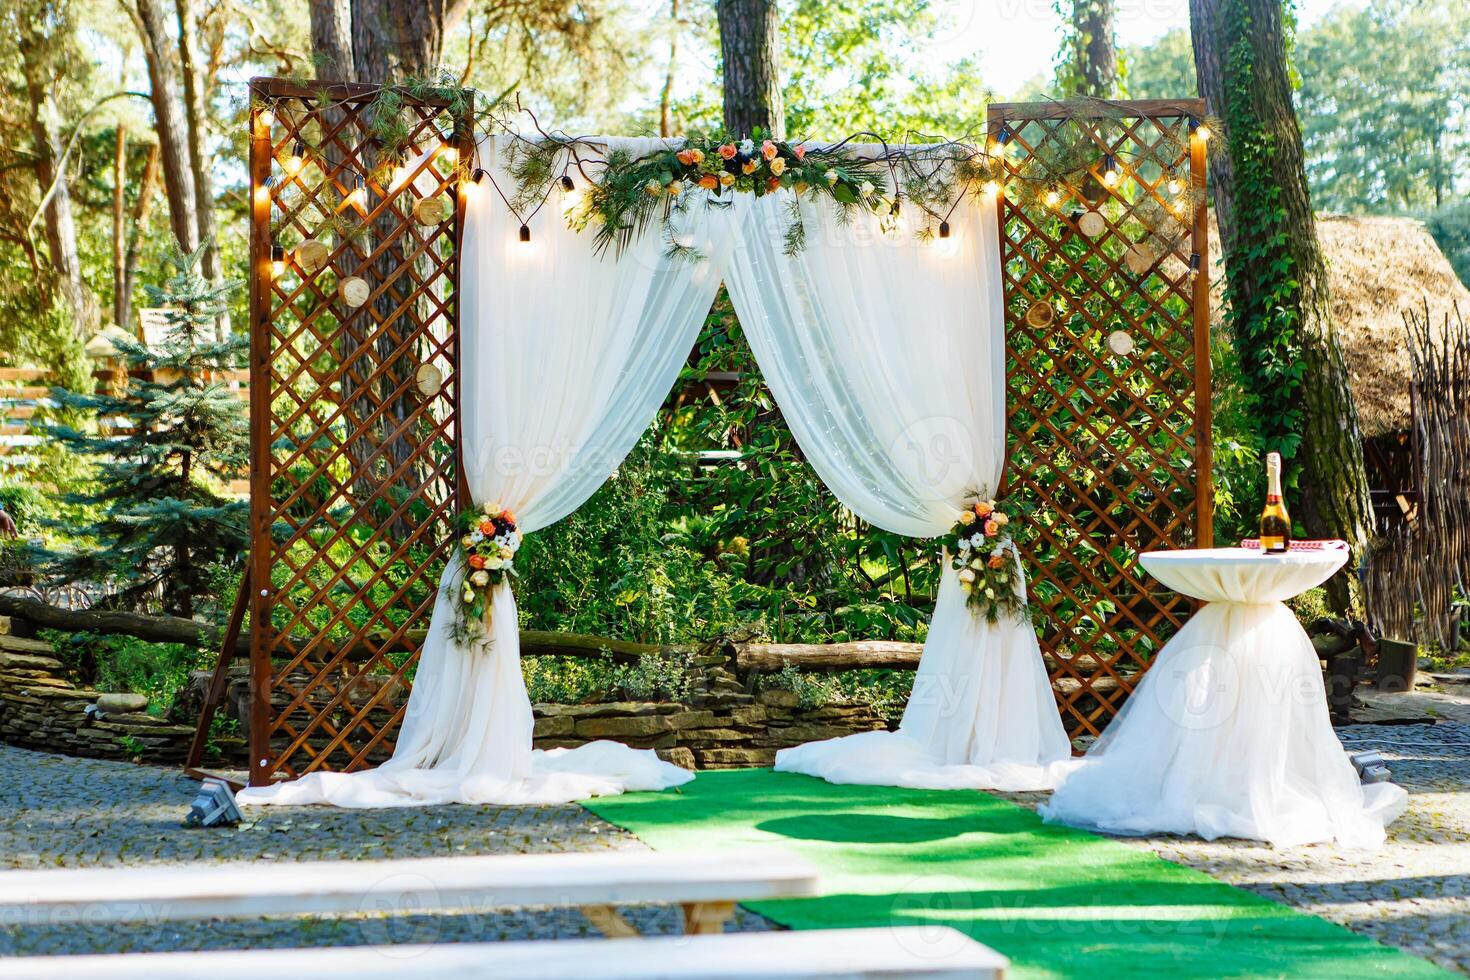 Beautiful place made with wooden square and floral decorations for outside wedding ceremony in wood. Cute wedding arc decorated with flowers and pine branches. photo